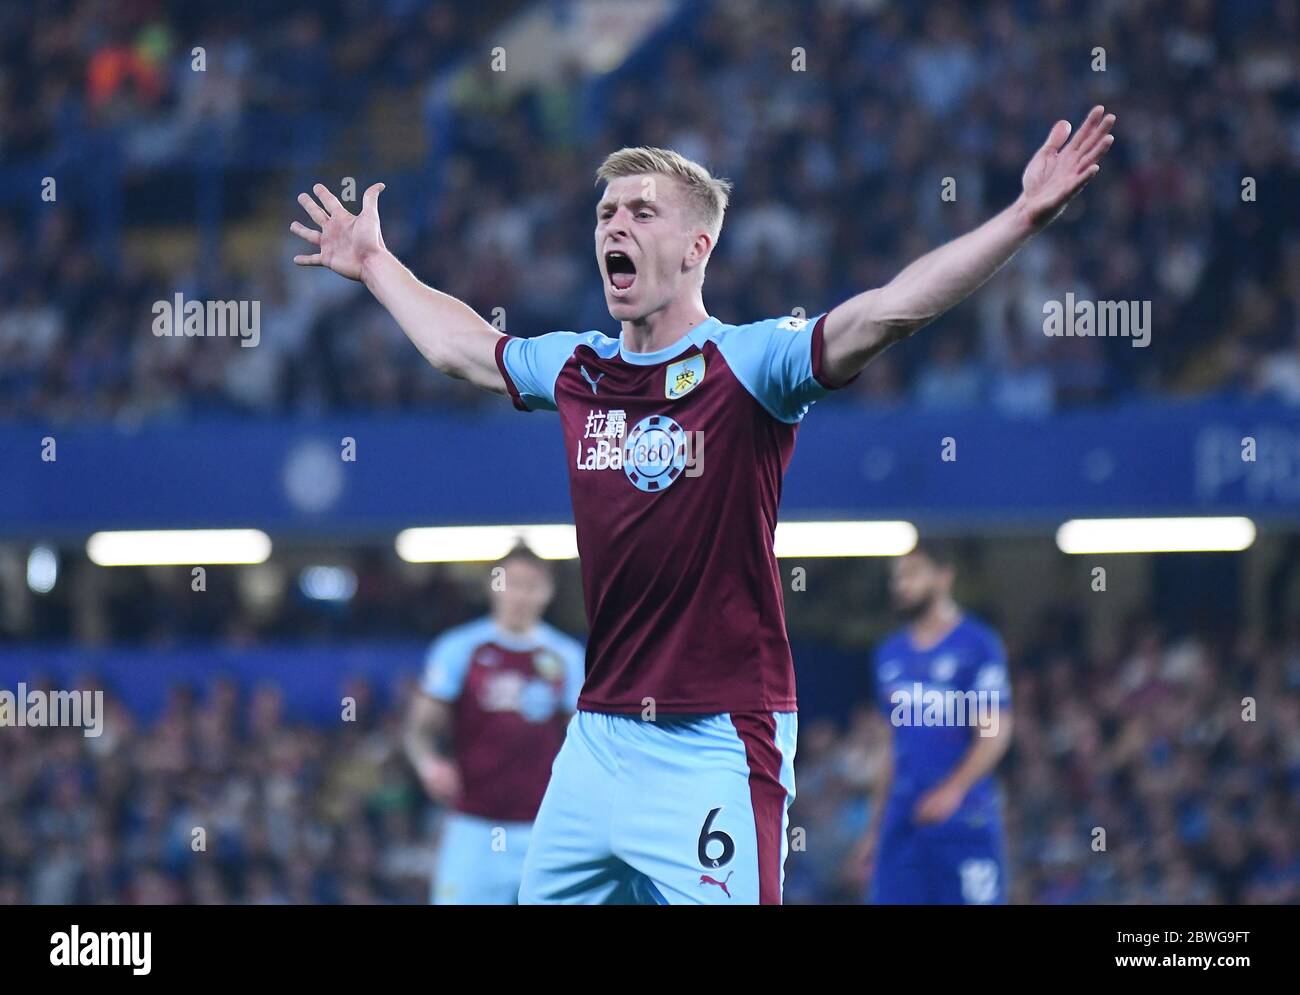 LONDON, ENGLAND - APRIL 22, 2019: Ben Mee of Burnley pictured during the 2018/19 Premier League game between Chelsea FC and Burnley FC at Stamford Bri Stock Photo